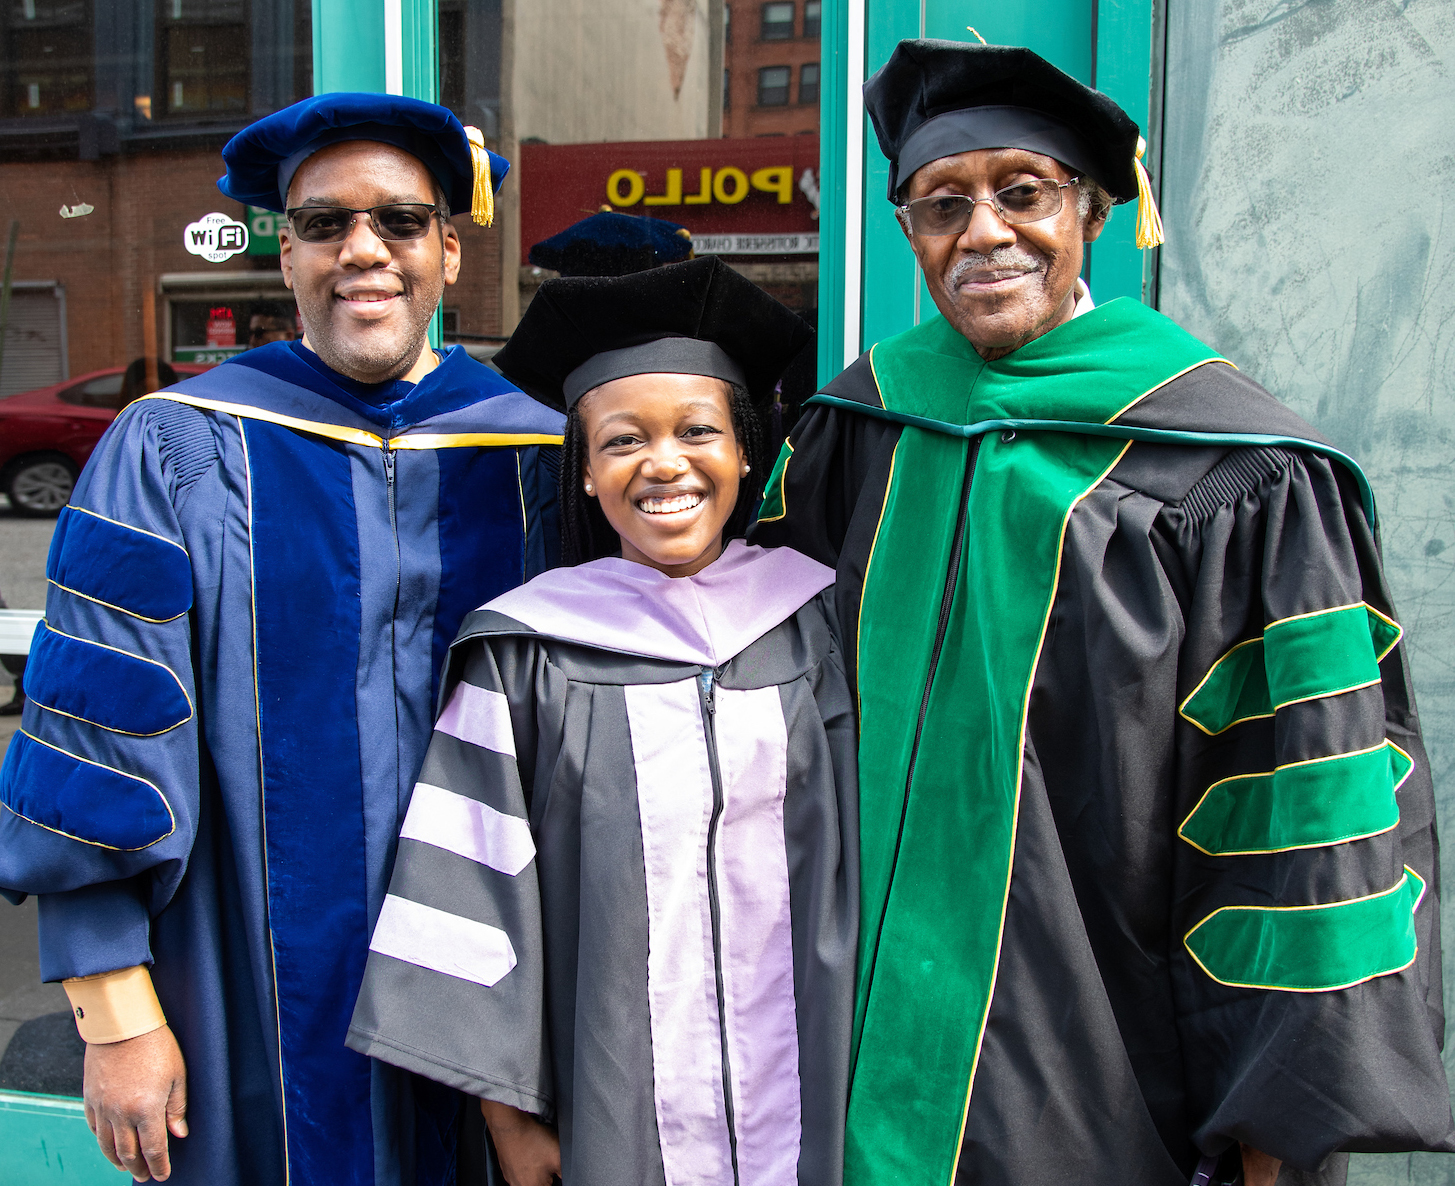 Sarah Nia Coleman, DDS ’22  (center), was hooded by her father Charles Coleman, PhD (left), and her grandfather William Brown, MD (right).